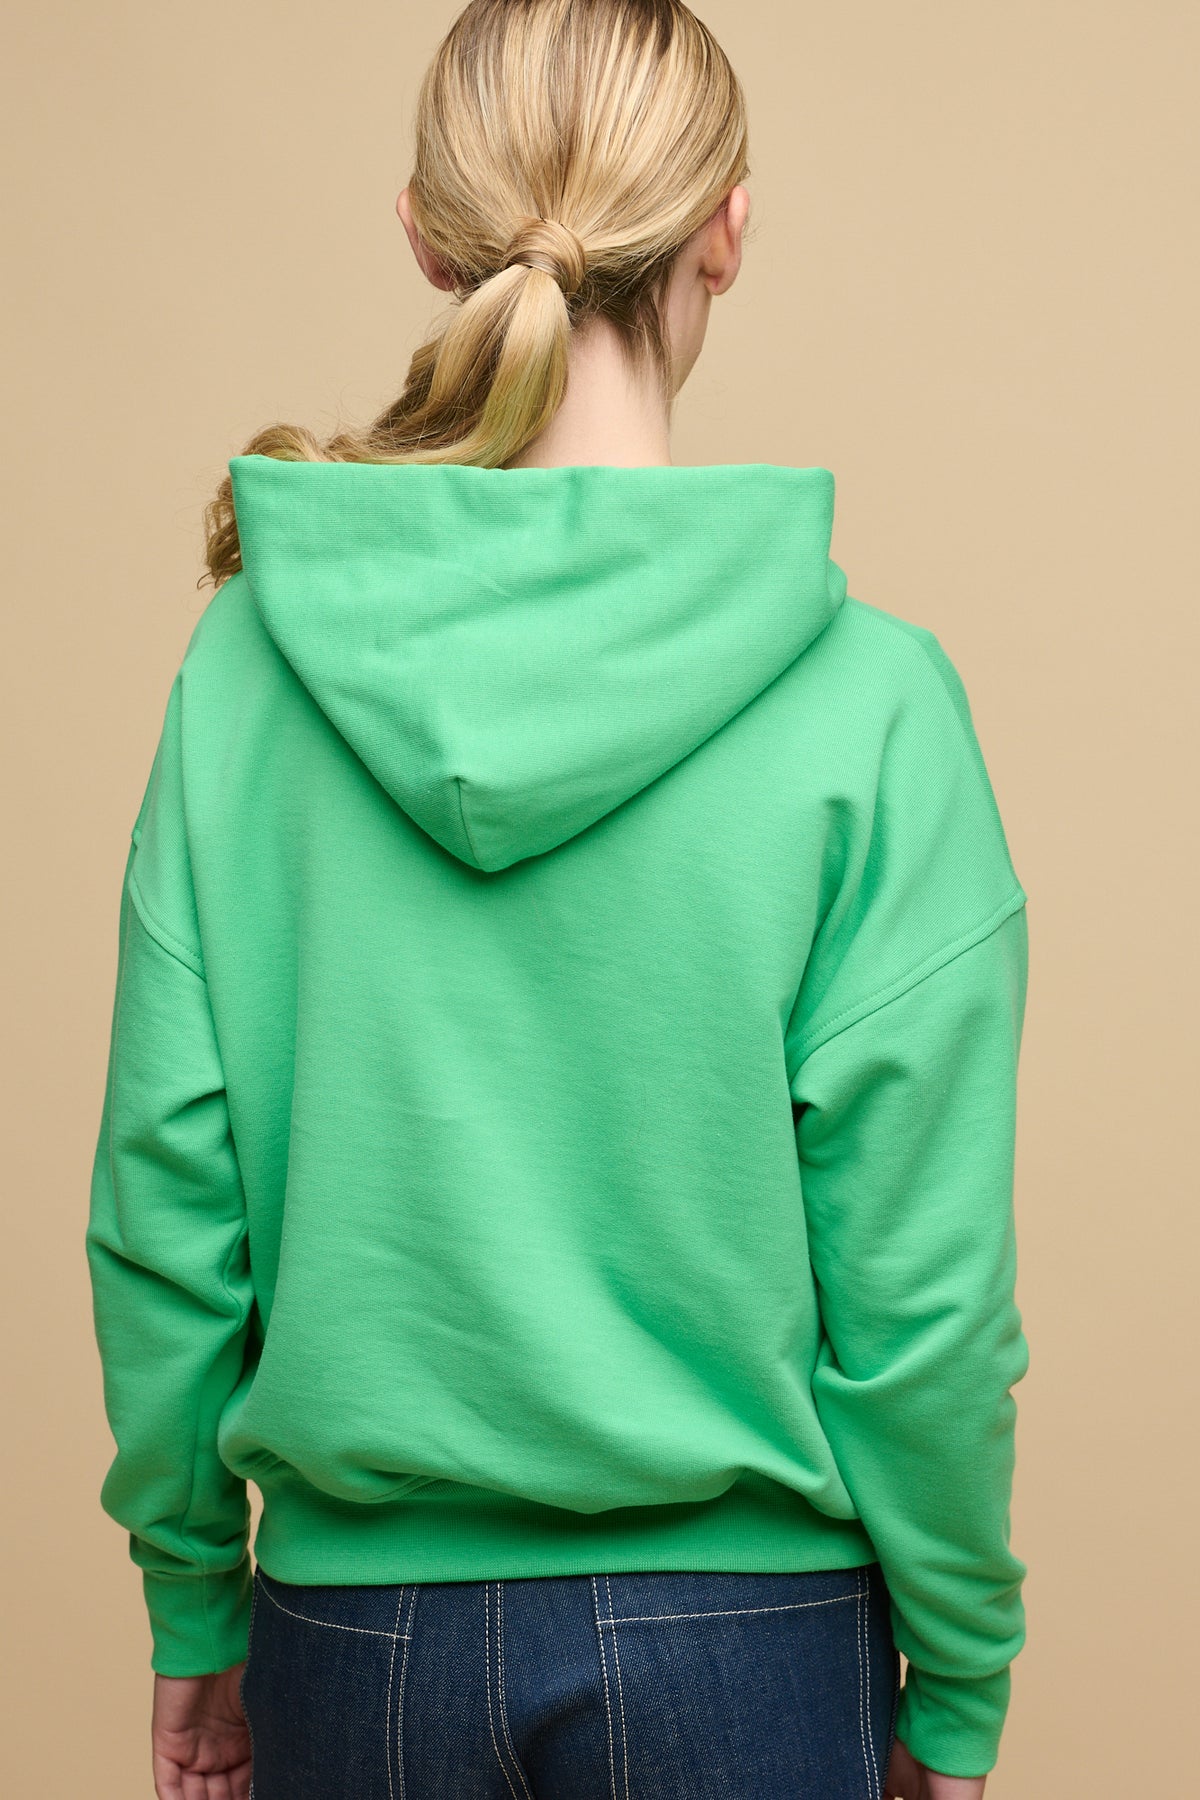 
            Thigh up image of the back of female wearing hooded sweatshirt in apple green 